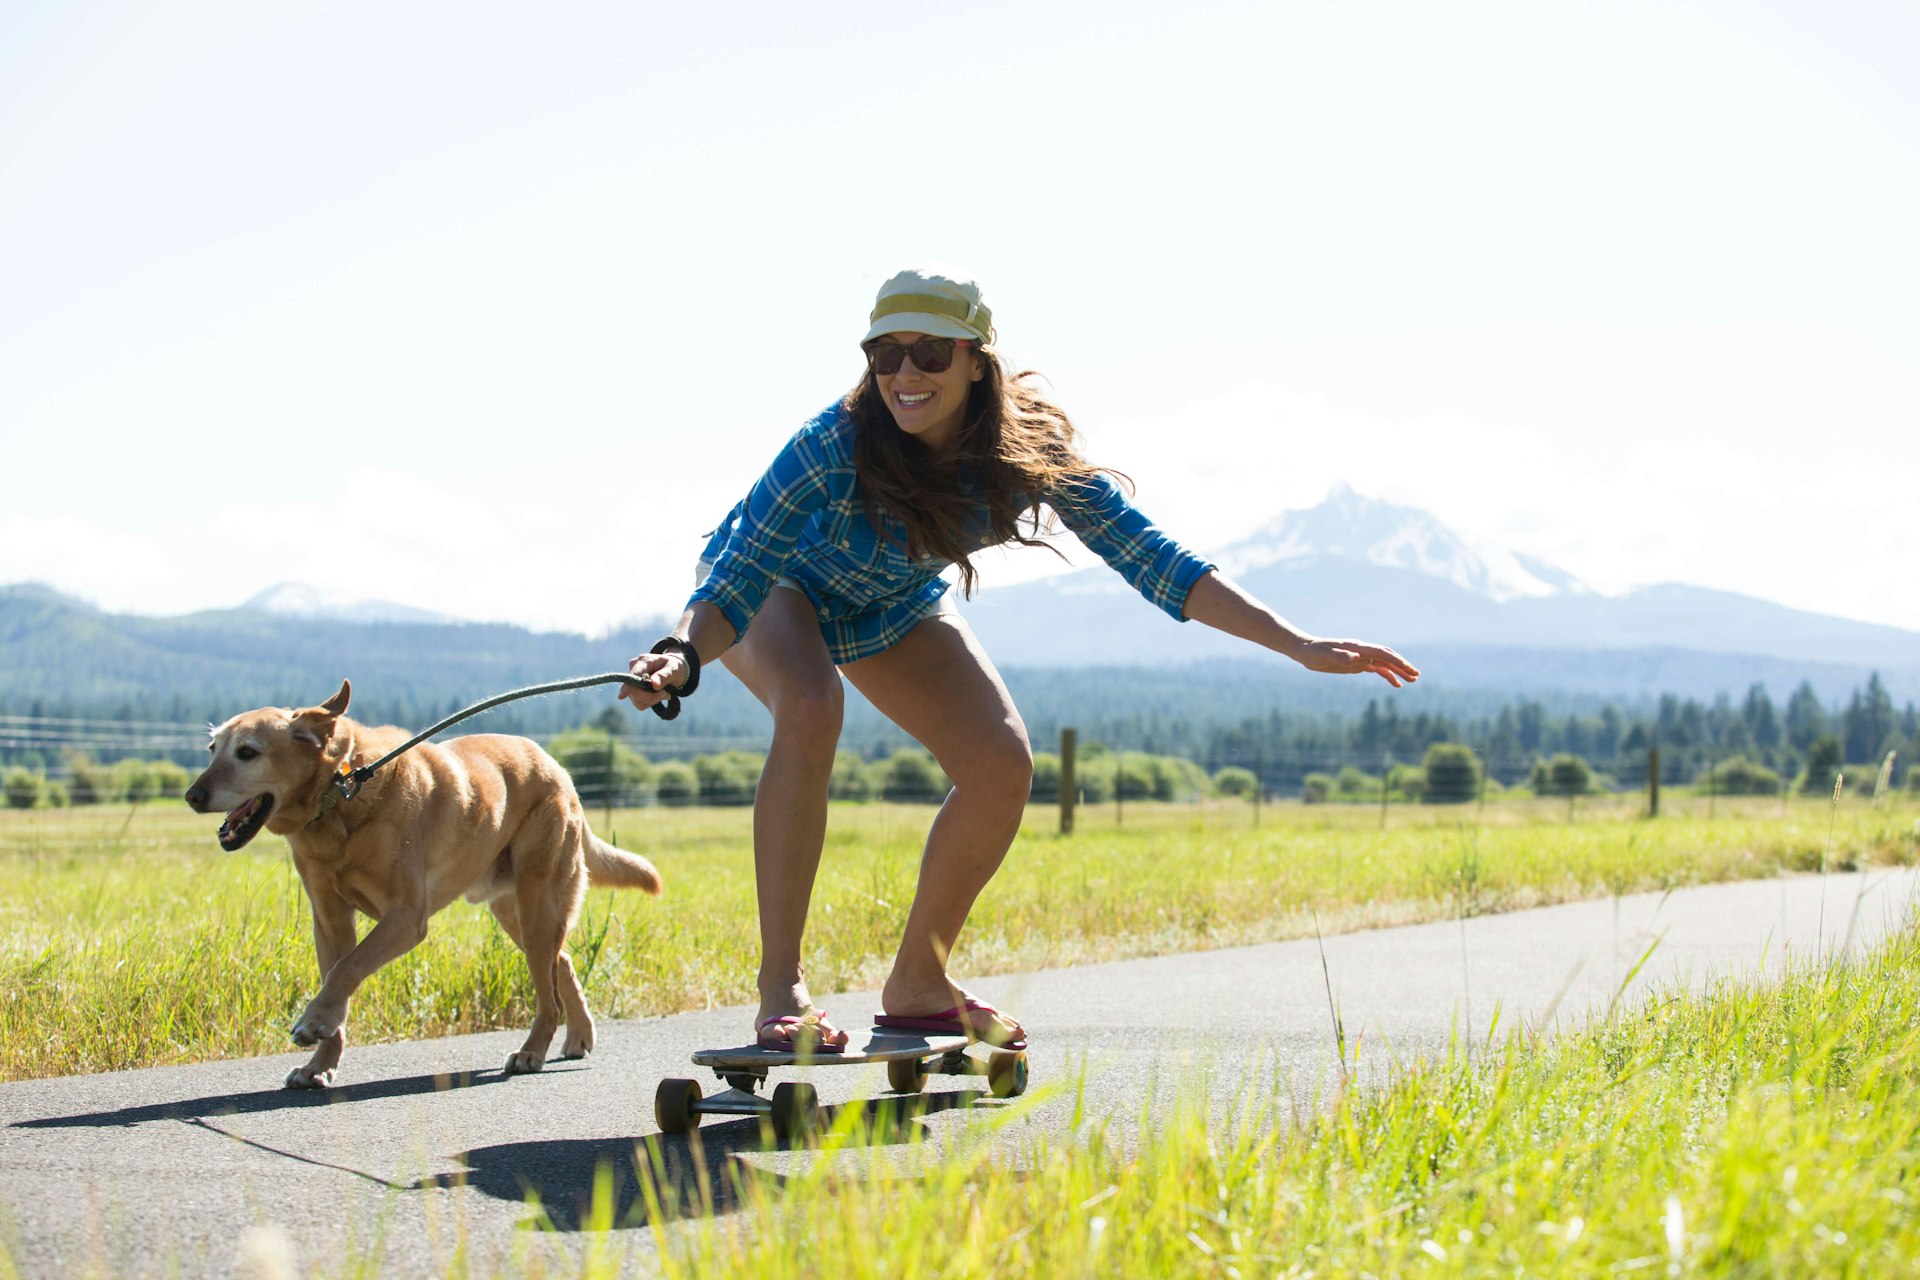 A woman skateboarding with her dog pulling her in Oregon 